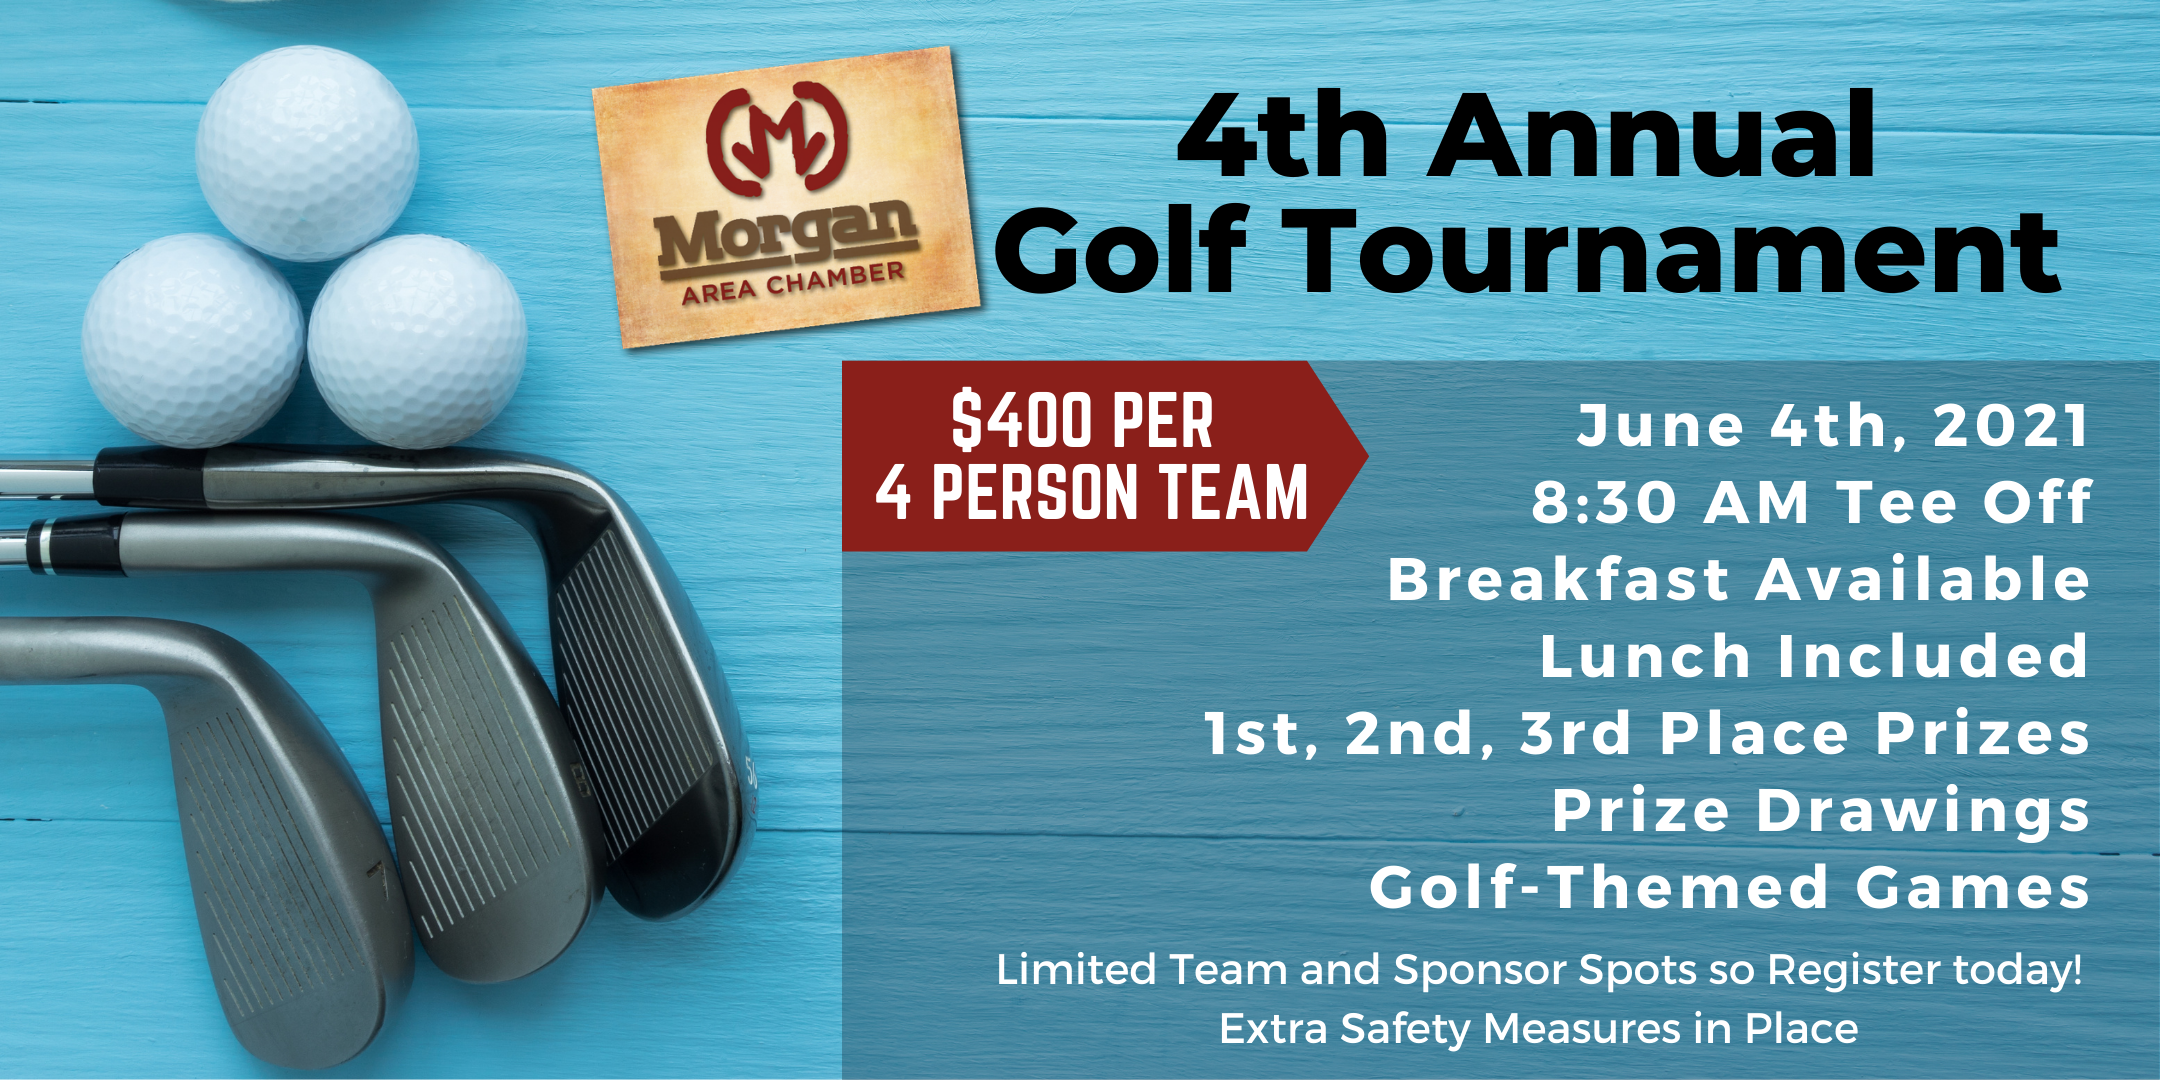 2021 Annual Golf Tournament by Morgan Area Chamber of Commerce